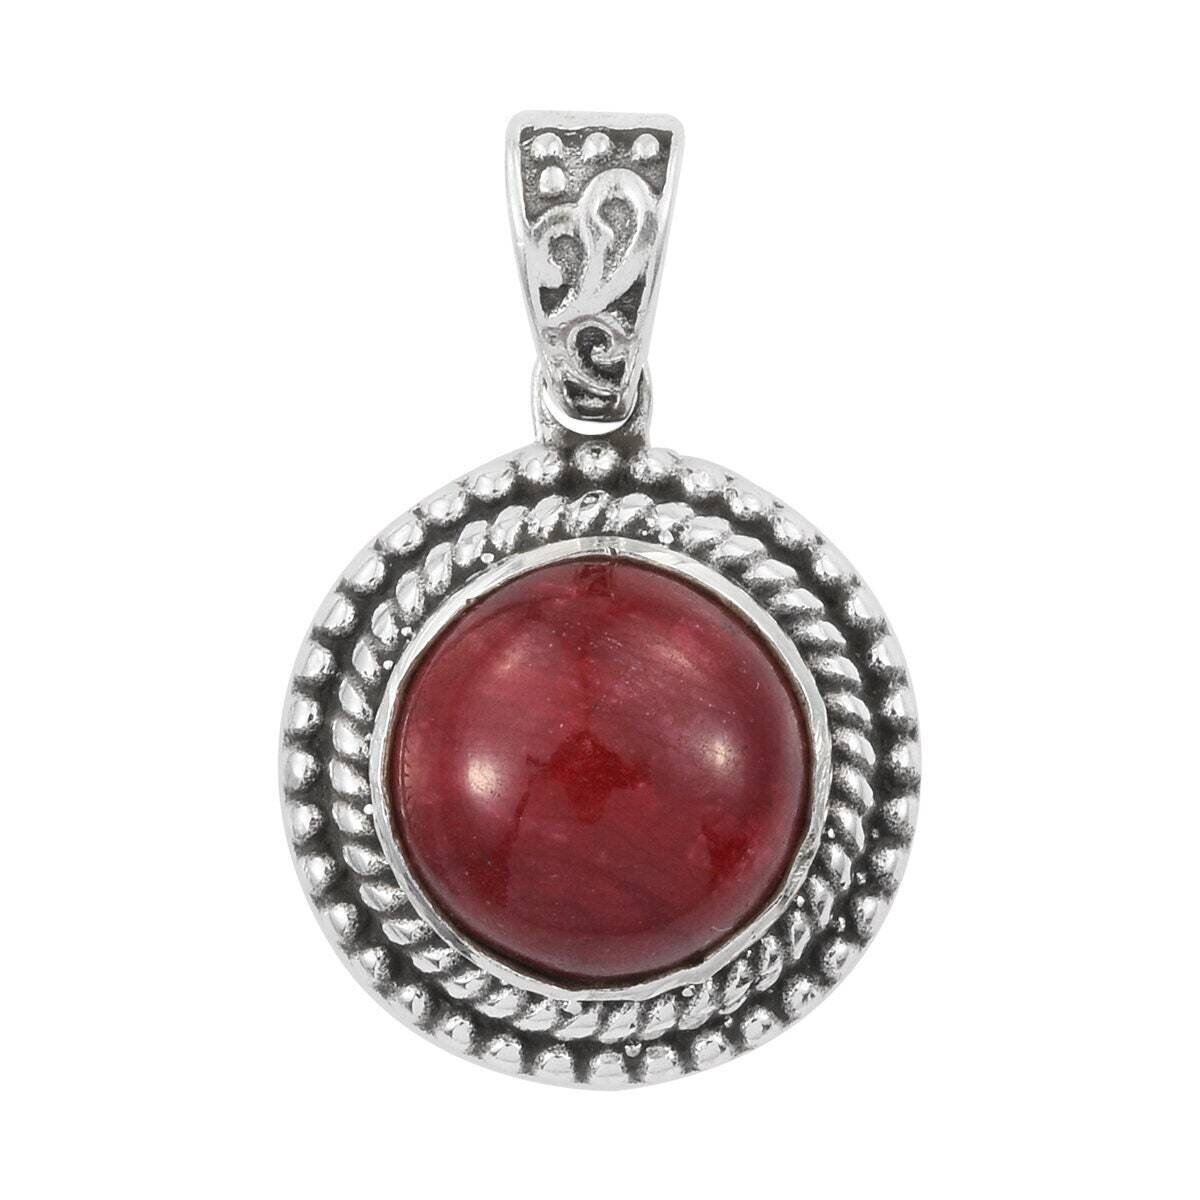 Ruby Top Quality Gemstone Handcrafted Pendant Cabochon, Opaque Stone Boho Pendant 925-Antique Silver Pendant Etsy Cyber Valentine Day